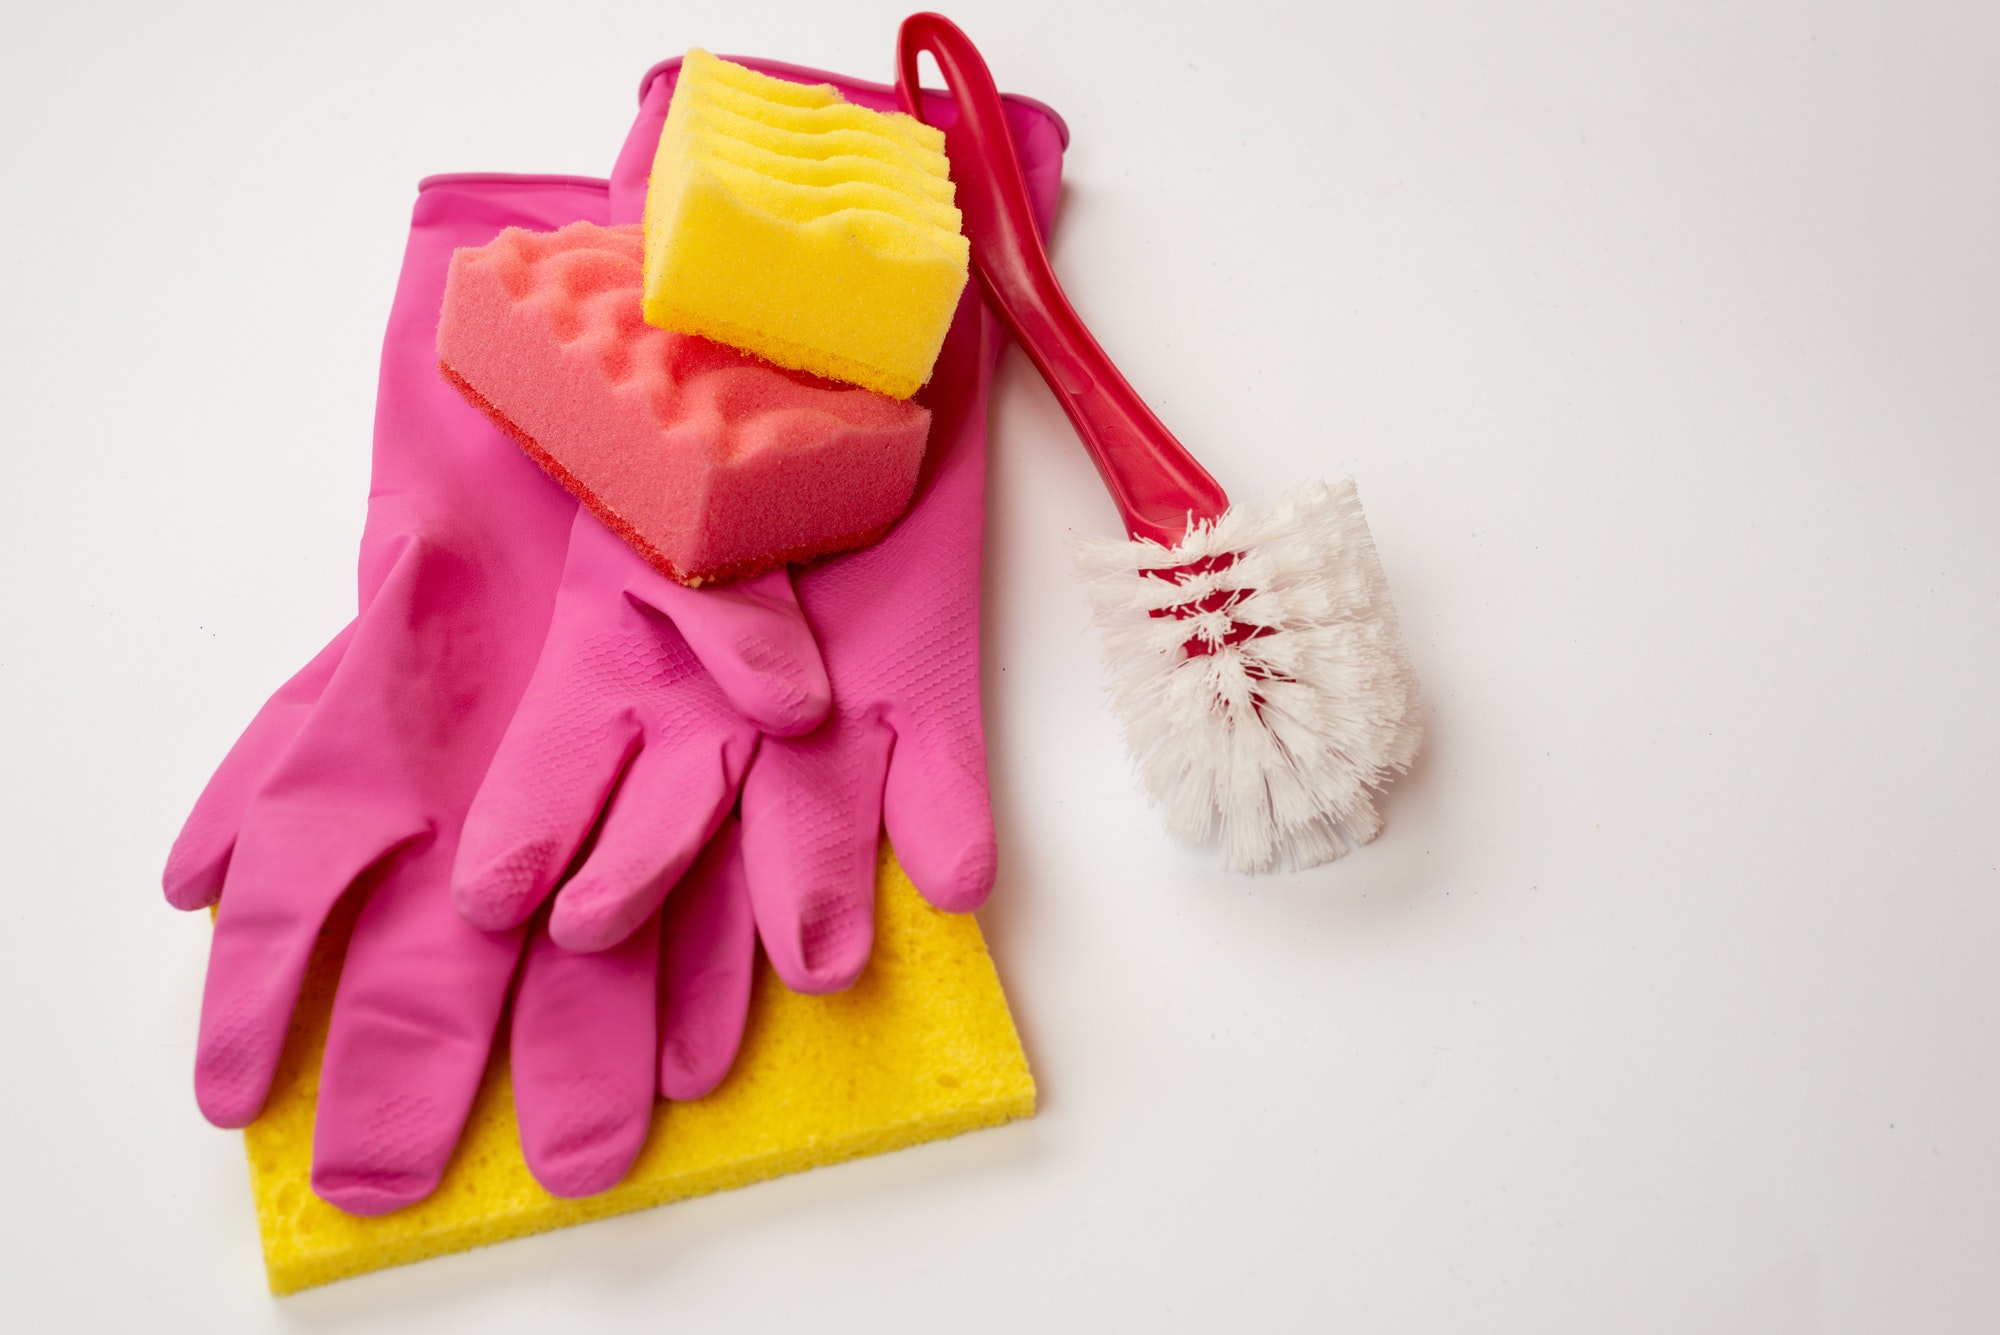 Sponge, household brush, latex gloves lying on a white background. Concept cleaning service